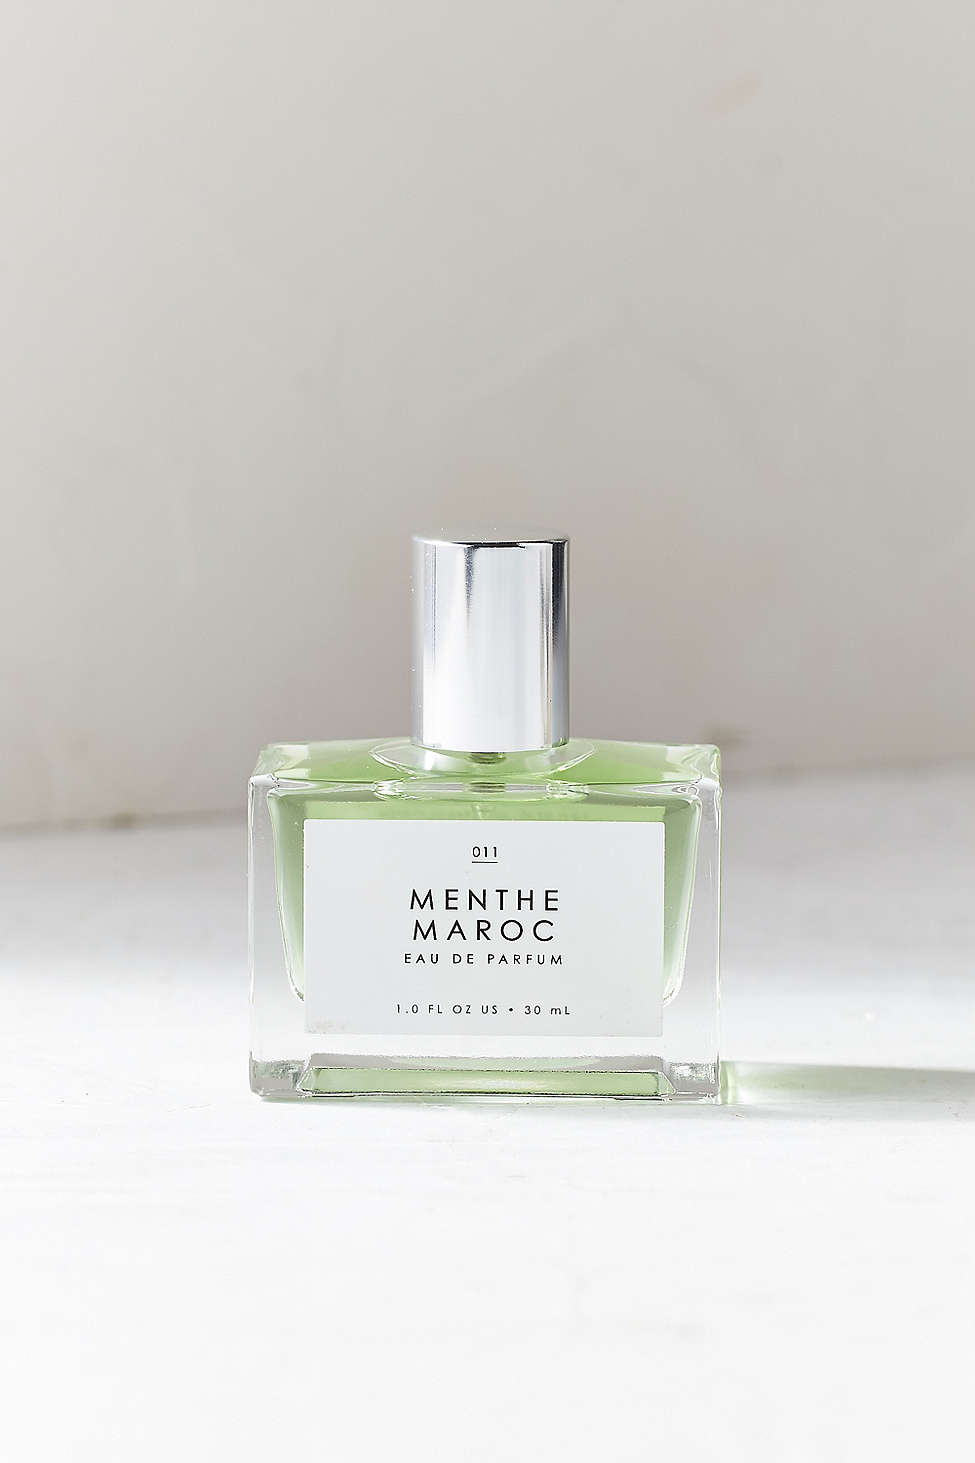 Menthe Maroc Urban Outfitters perfume - a new fragrance for women 2017